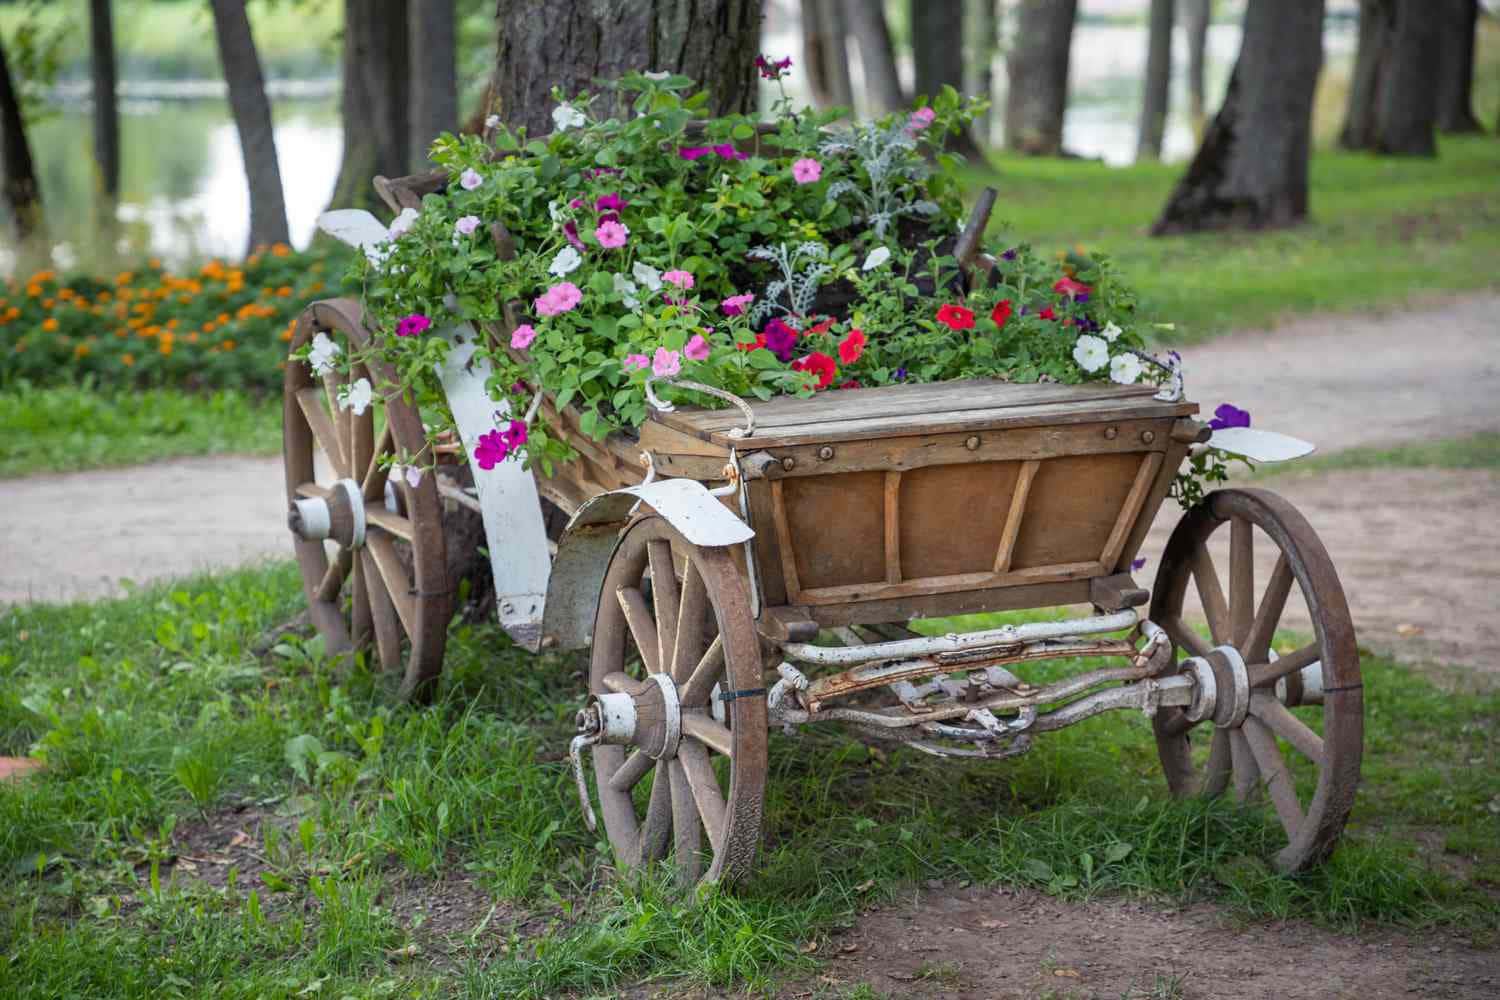 A colorful, vintage flower cart brimming with fresh flowers Wallpaper